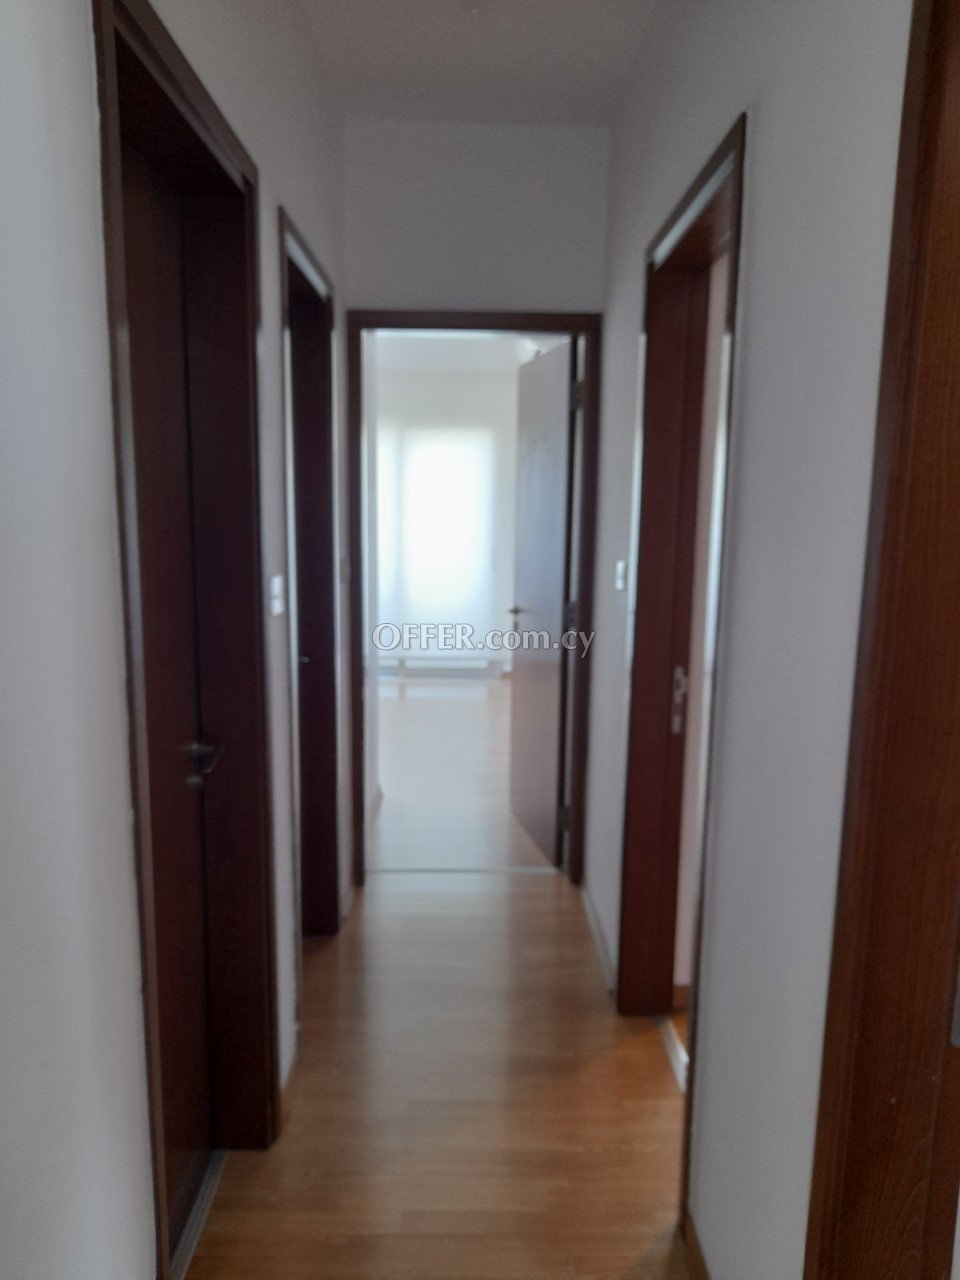 3-bedroom Apartment 125 sqm in Limassol (Town) - 10